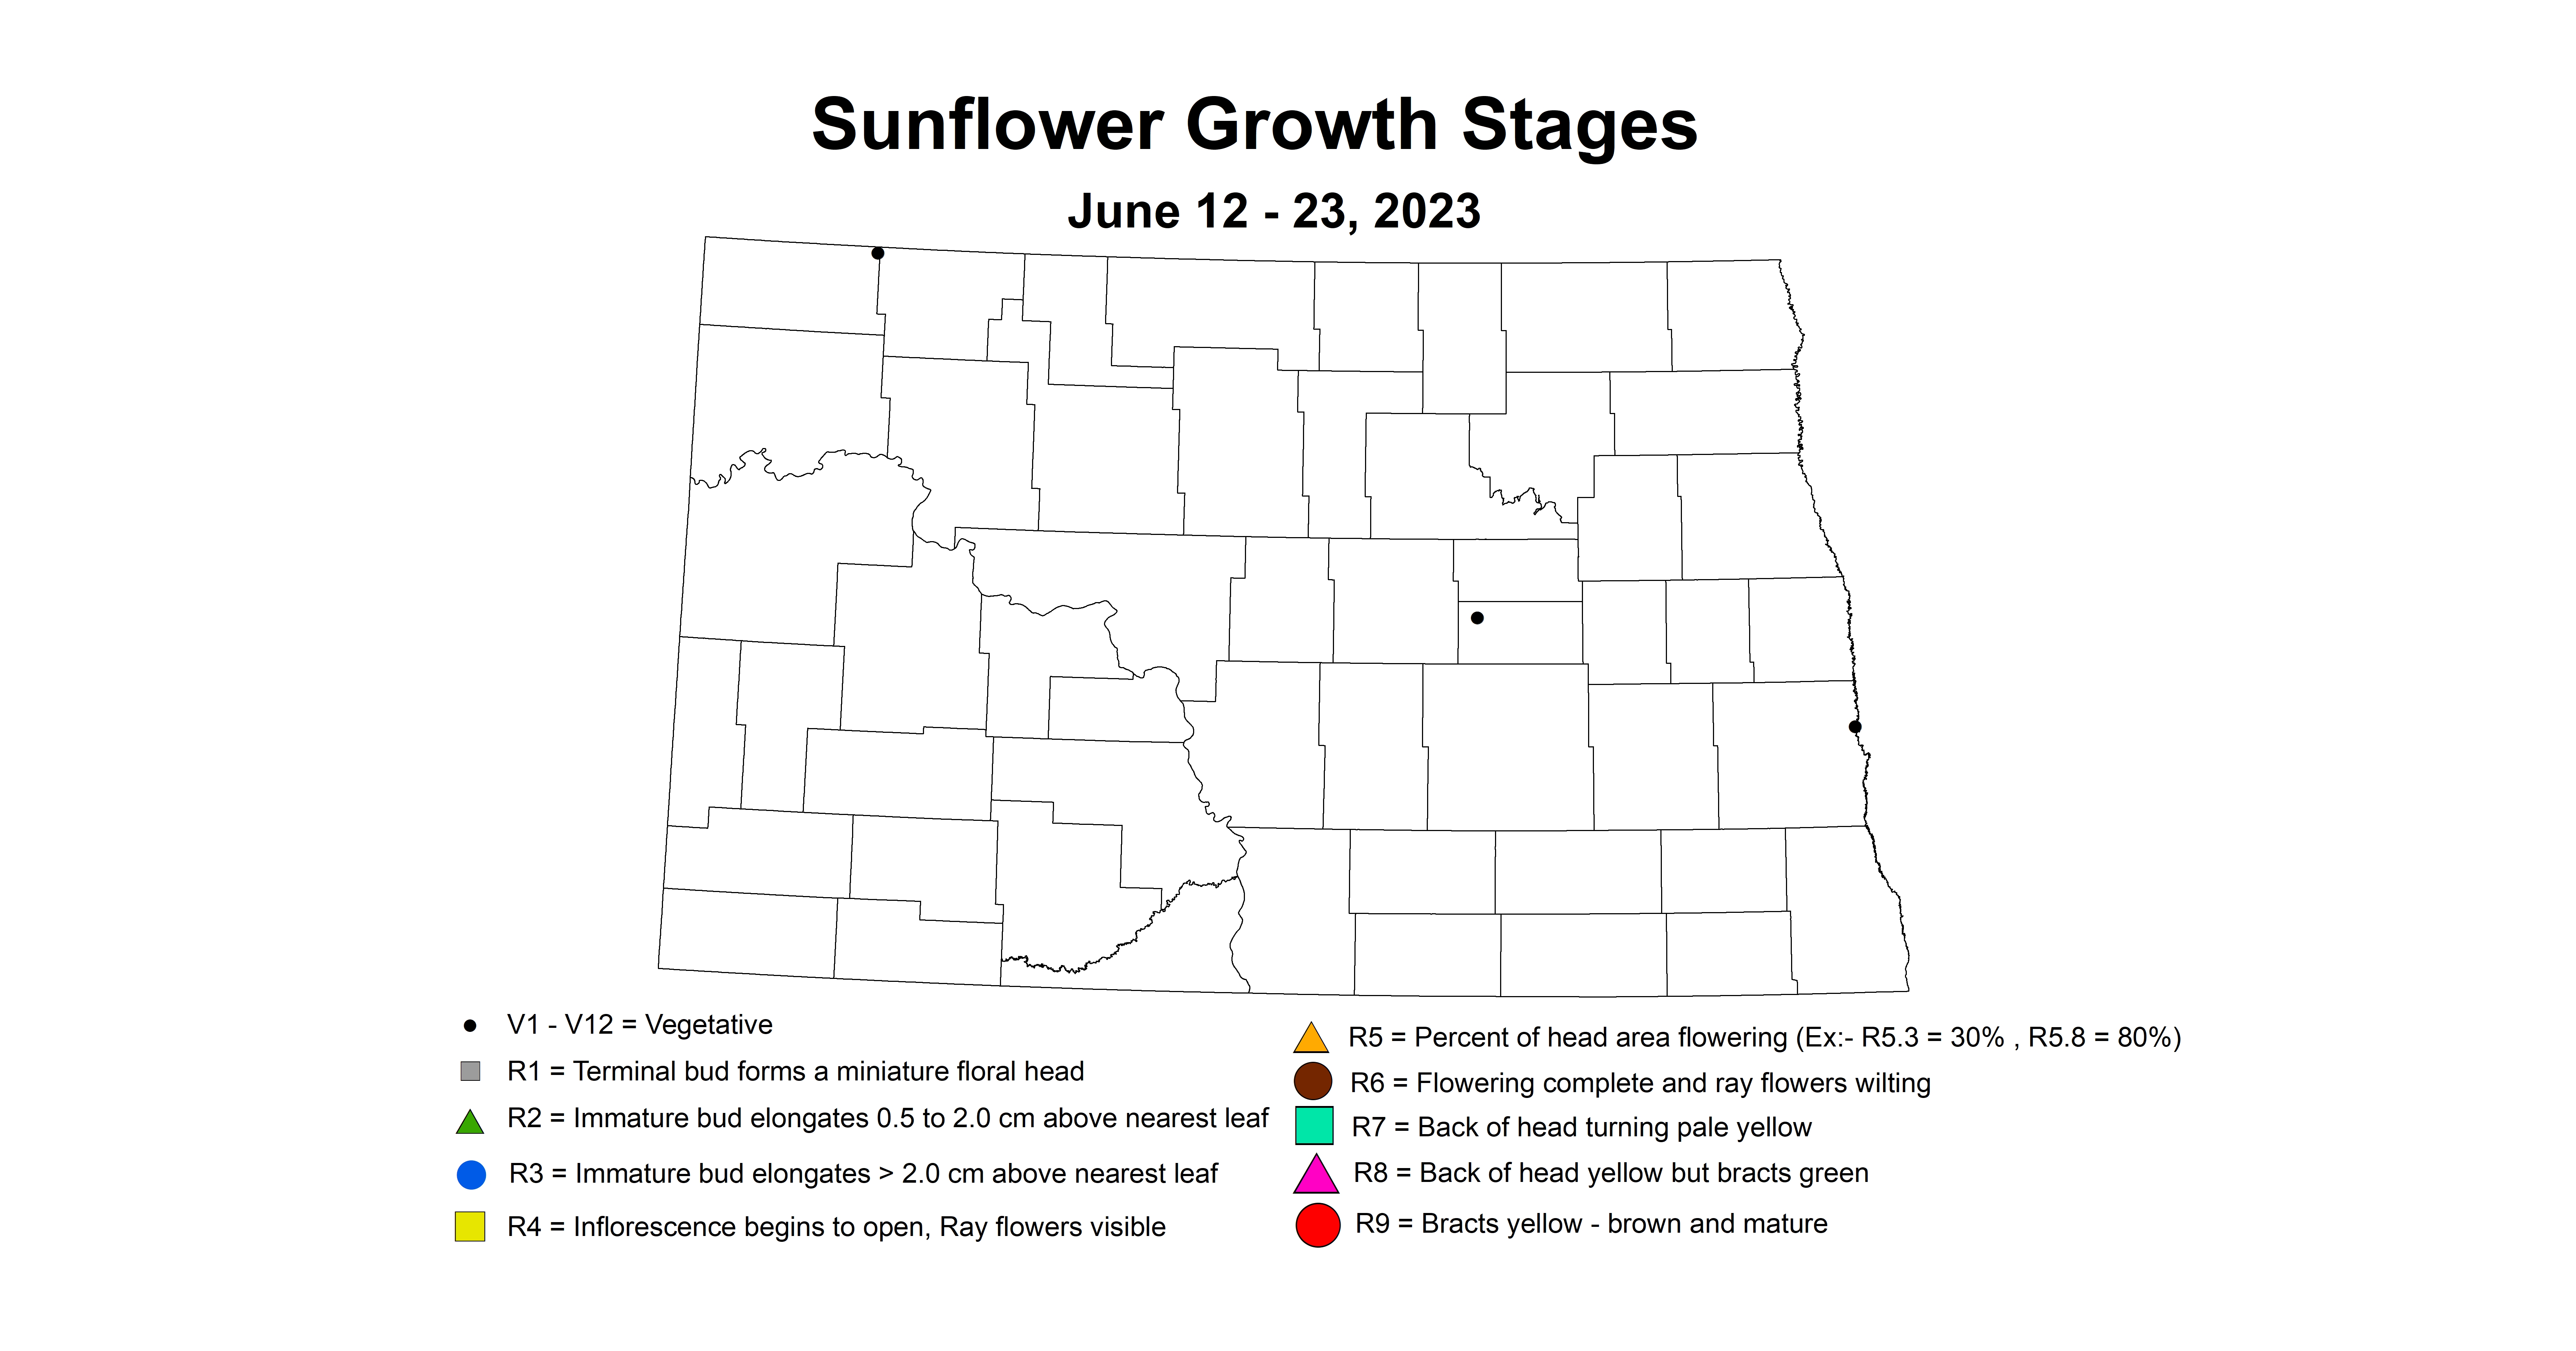 sunflower insecttrap growth stages June 12-23 2023